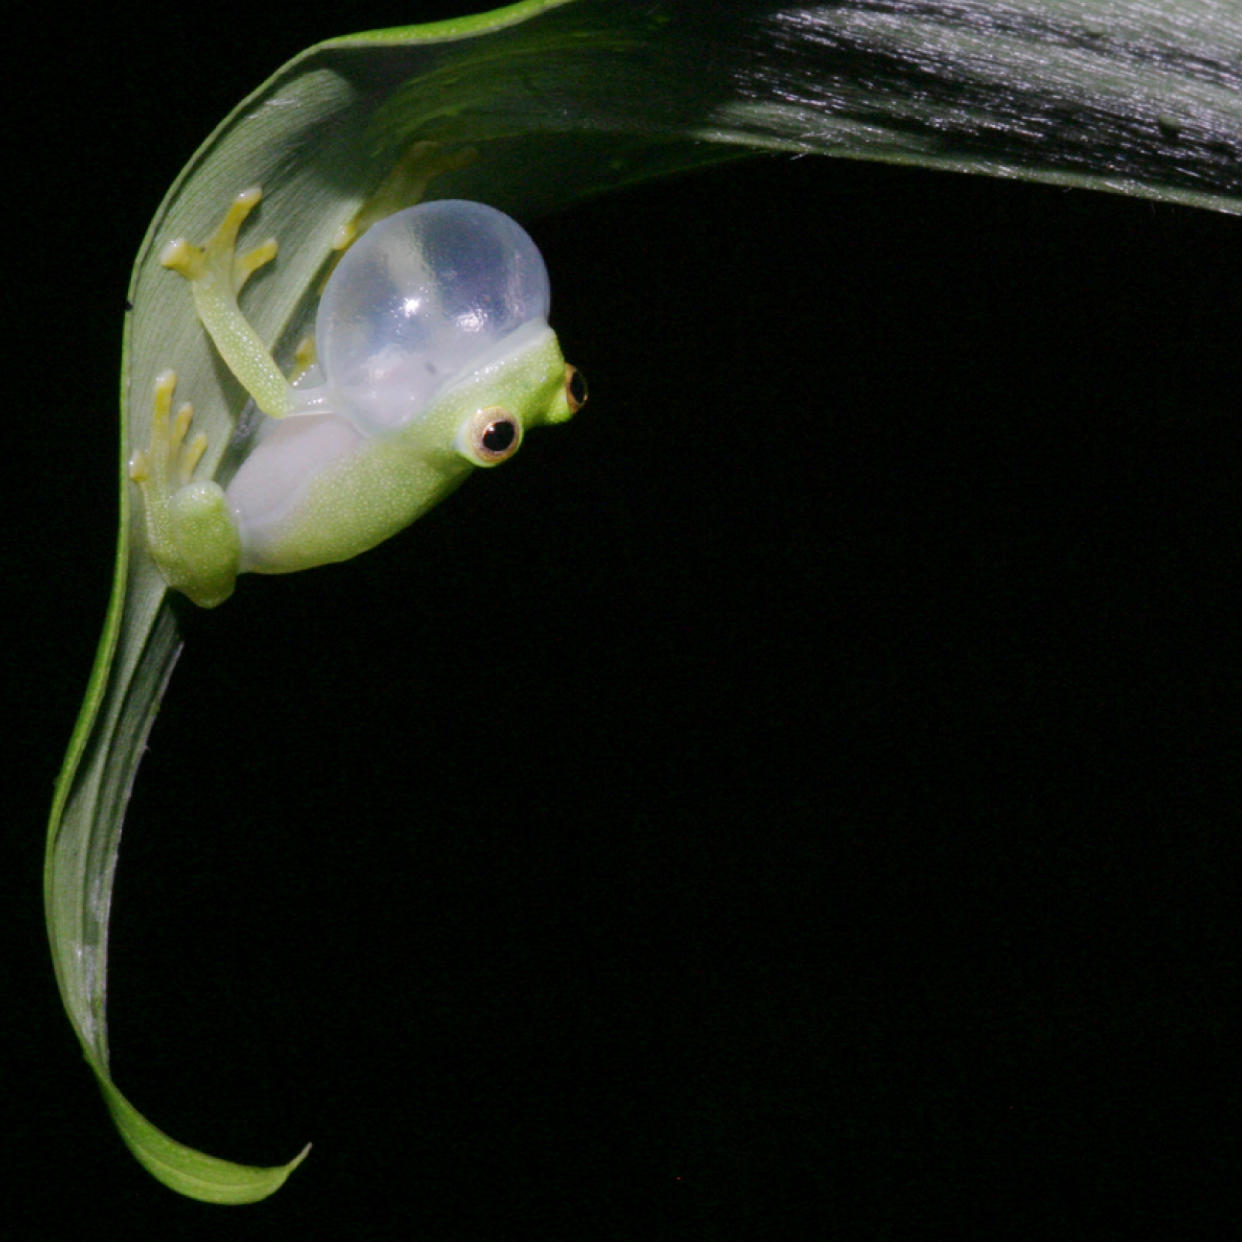 This photo provided by researchers in December 2022 shows a glass frog, strict leaf dwelling frogs, that sleep, forage, fight, mate, and provide (male) parental care on leaves over tropical streams. Some frogs found in South and Central America have the rare ability to turn on and off their nearly transparent appearance, researchers report Thursday, Dec. 22, 2022, in the journal Science. (Jesse Delia/AMNH via AP)